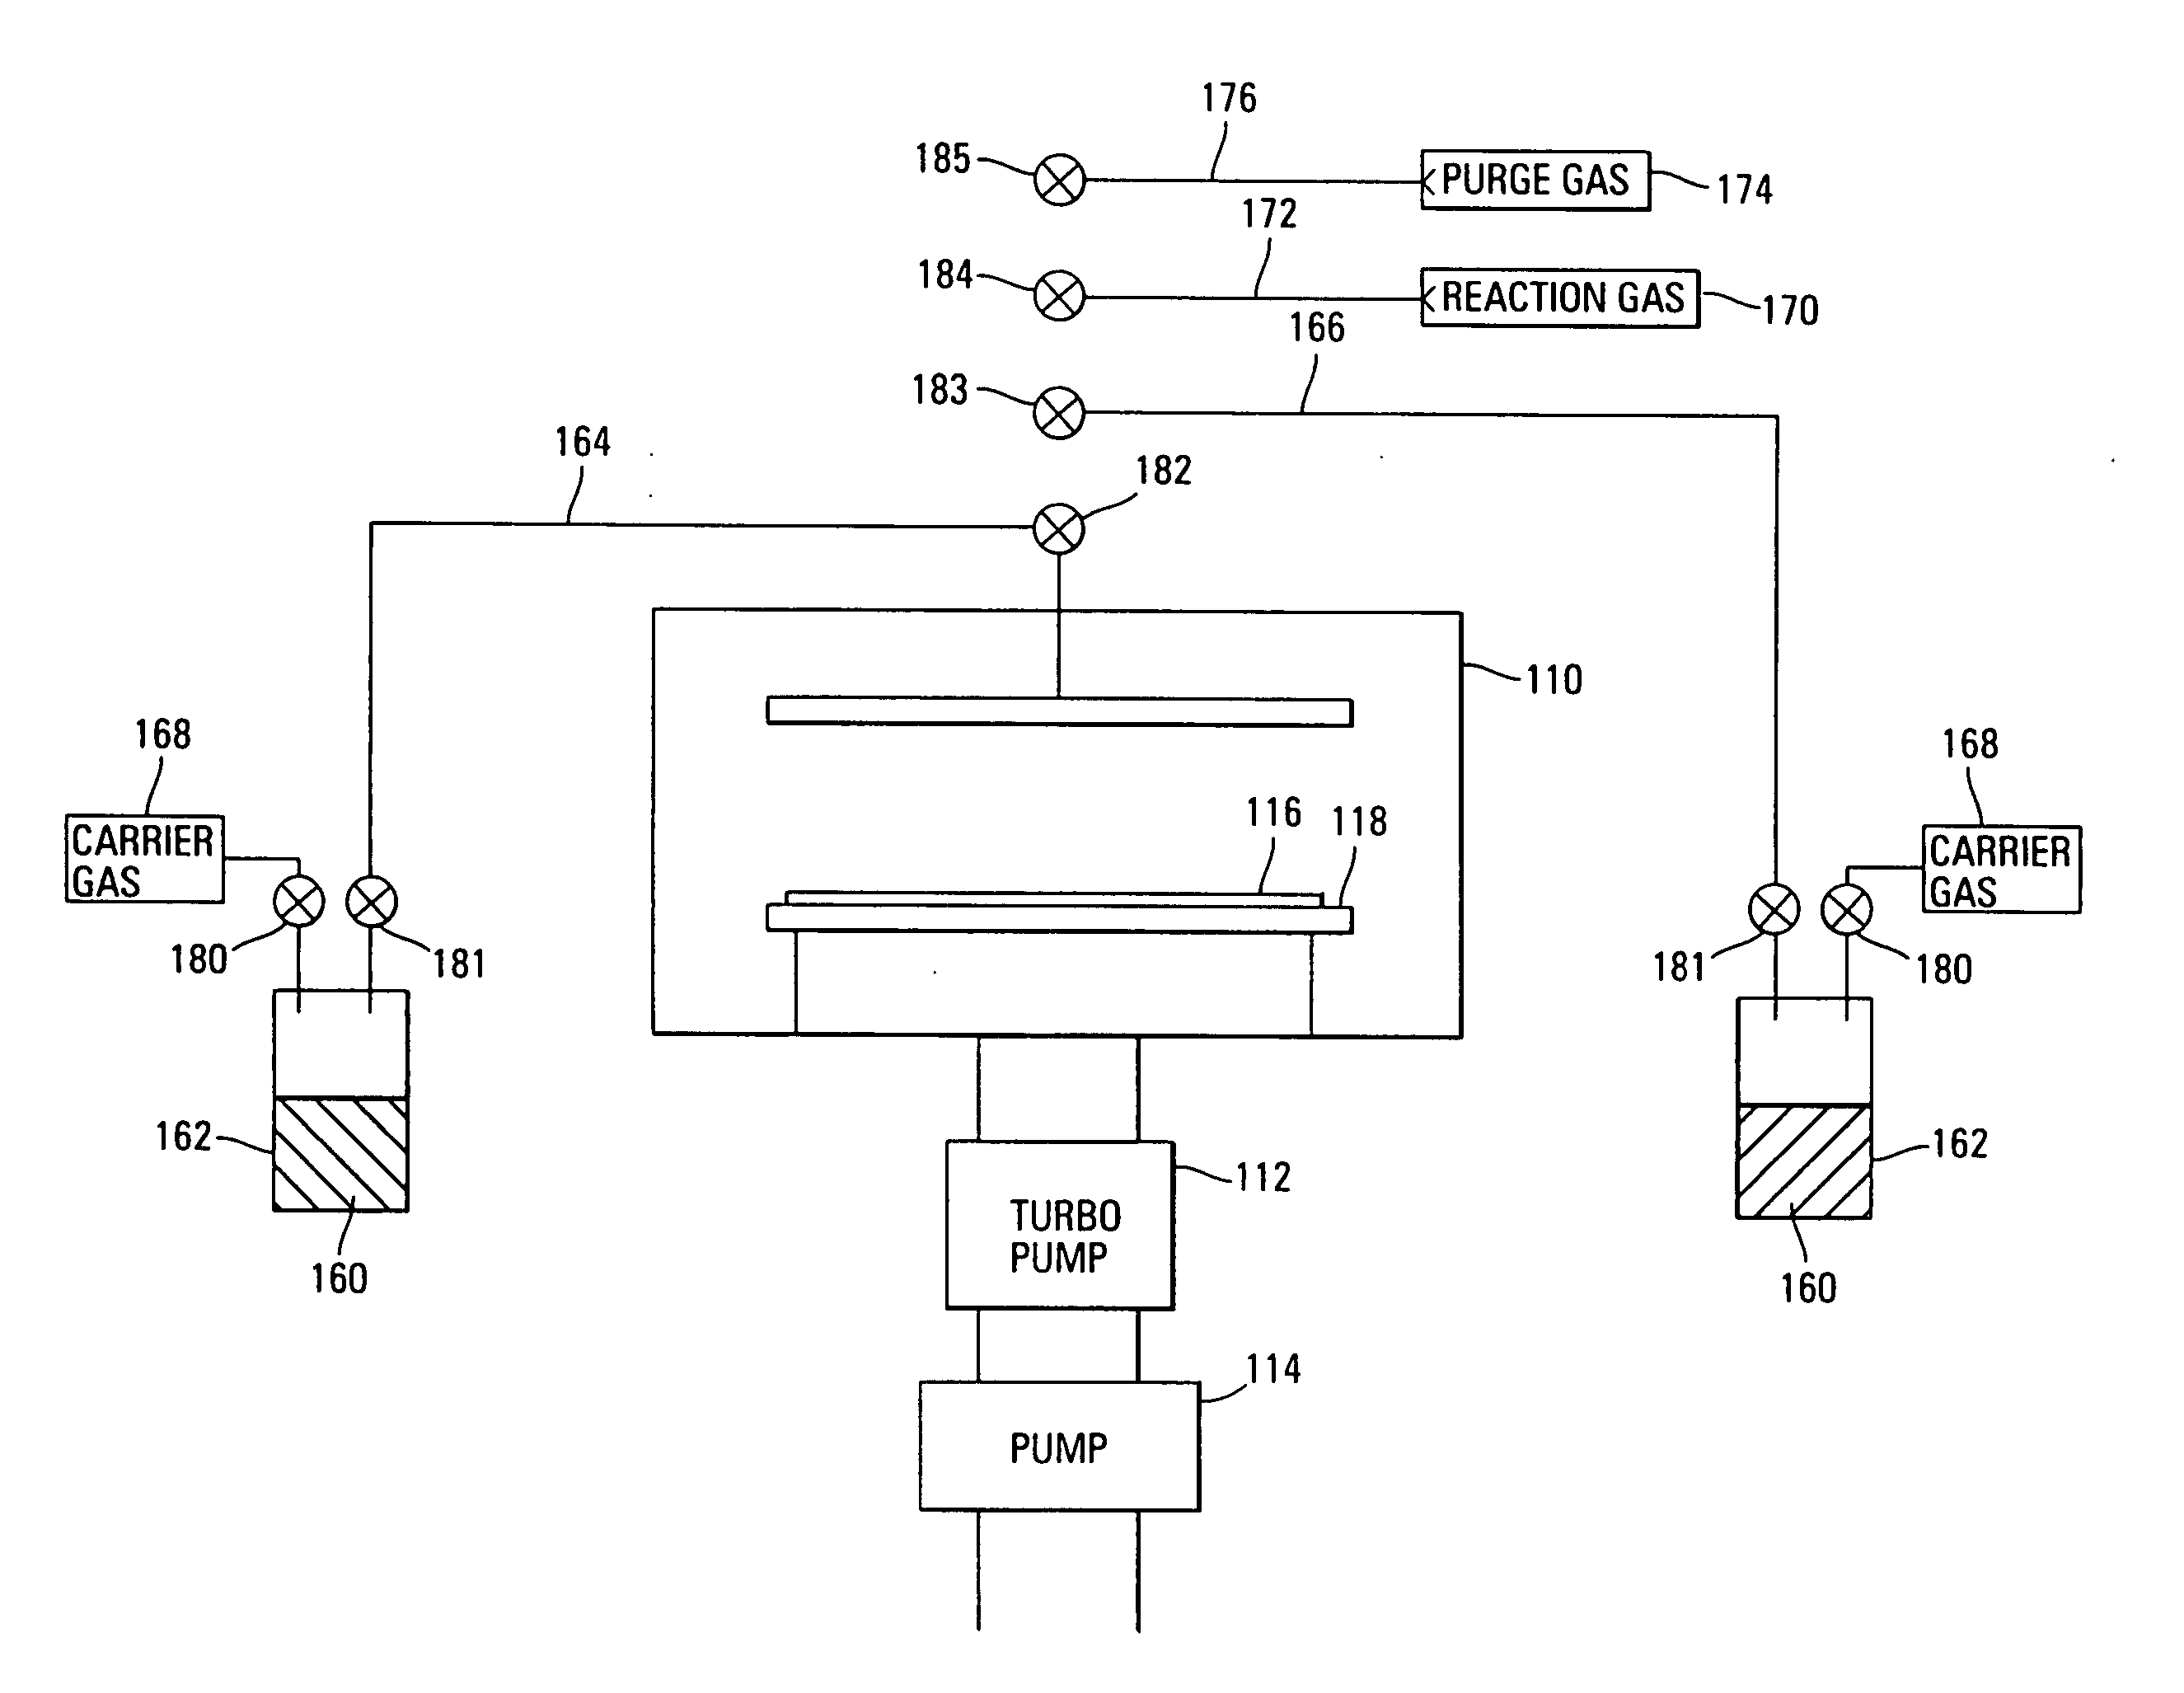 Systems and methods of forming refractory metal nitride layers using disilazanes